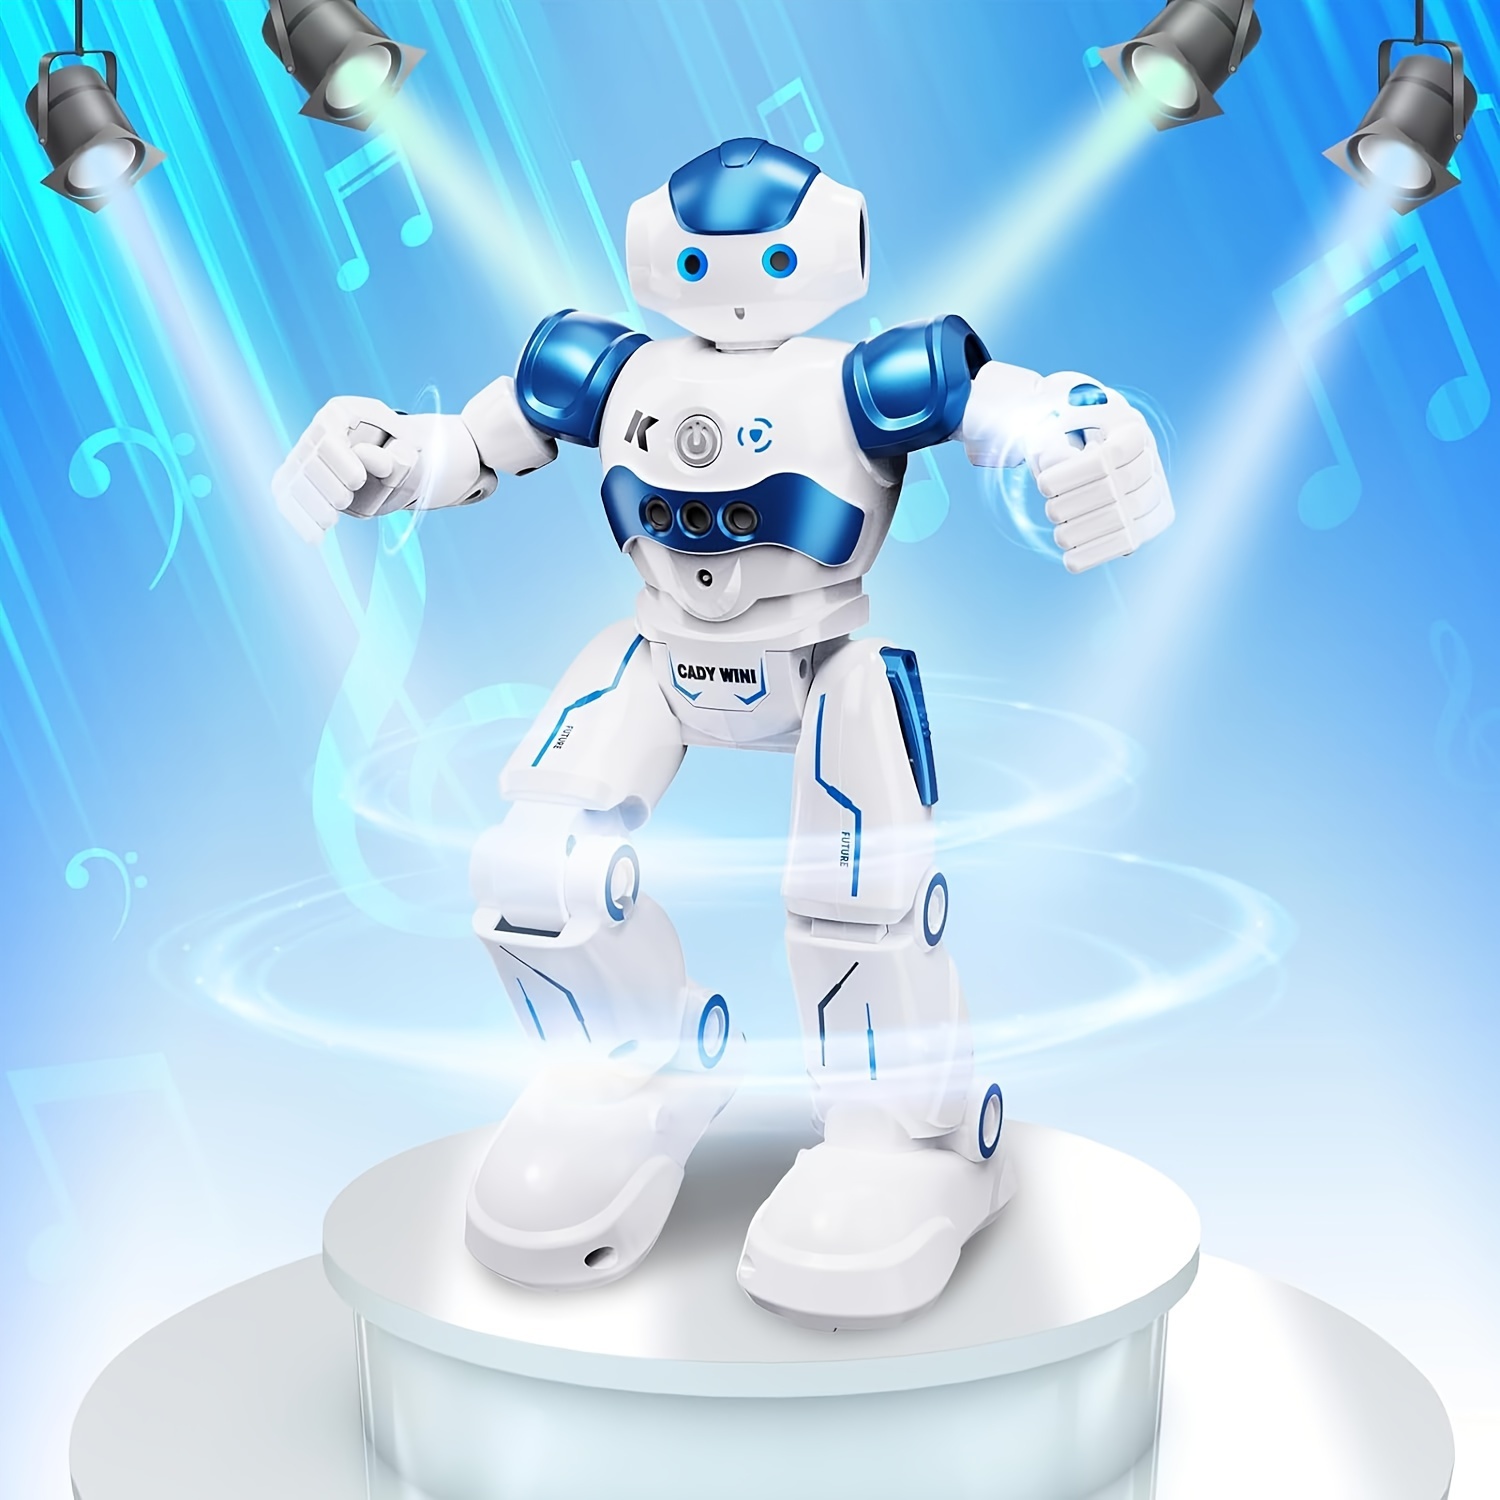 GILOBABY Robot Toys, Remote Control Robot Toy, RC Robots for Kids with LED  Eyes, Flexible Head & Arms, Dance Moves and Music, Birthday Gifts for Boys